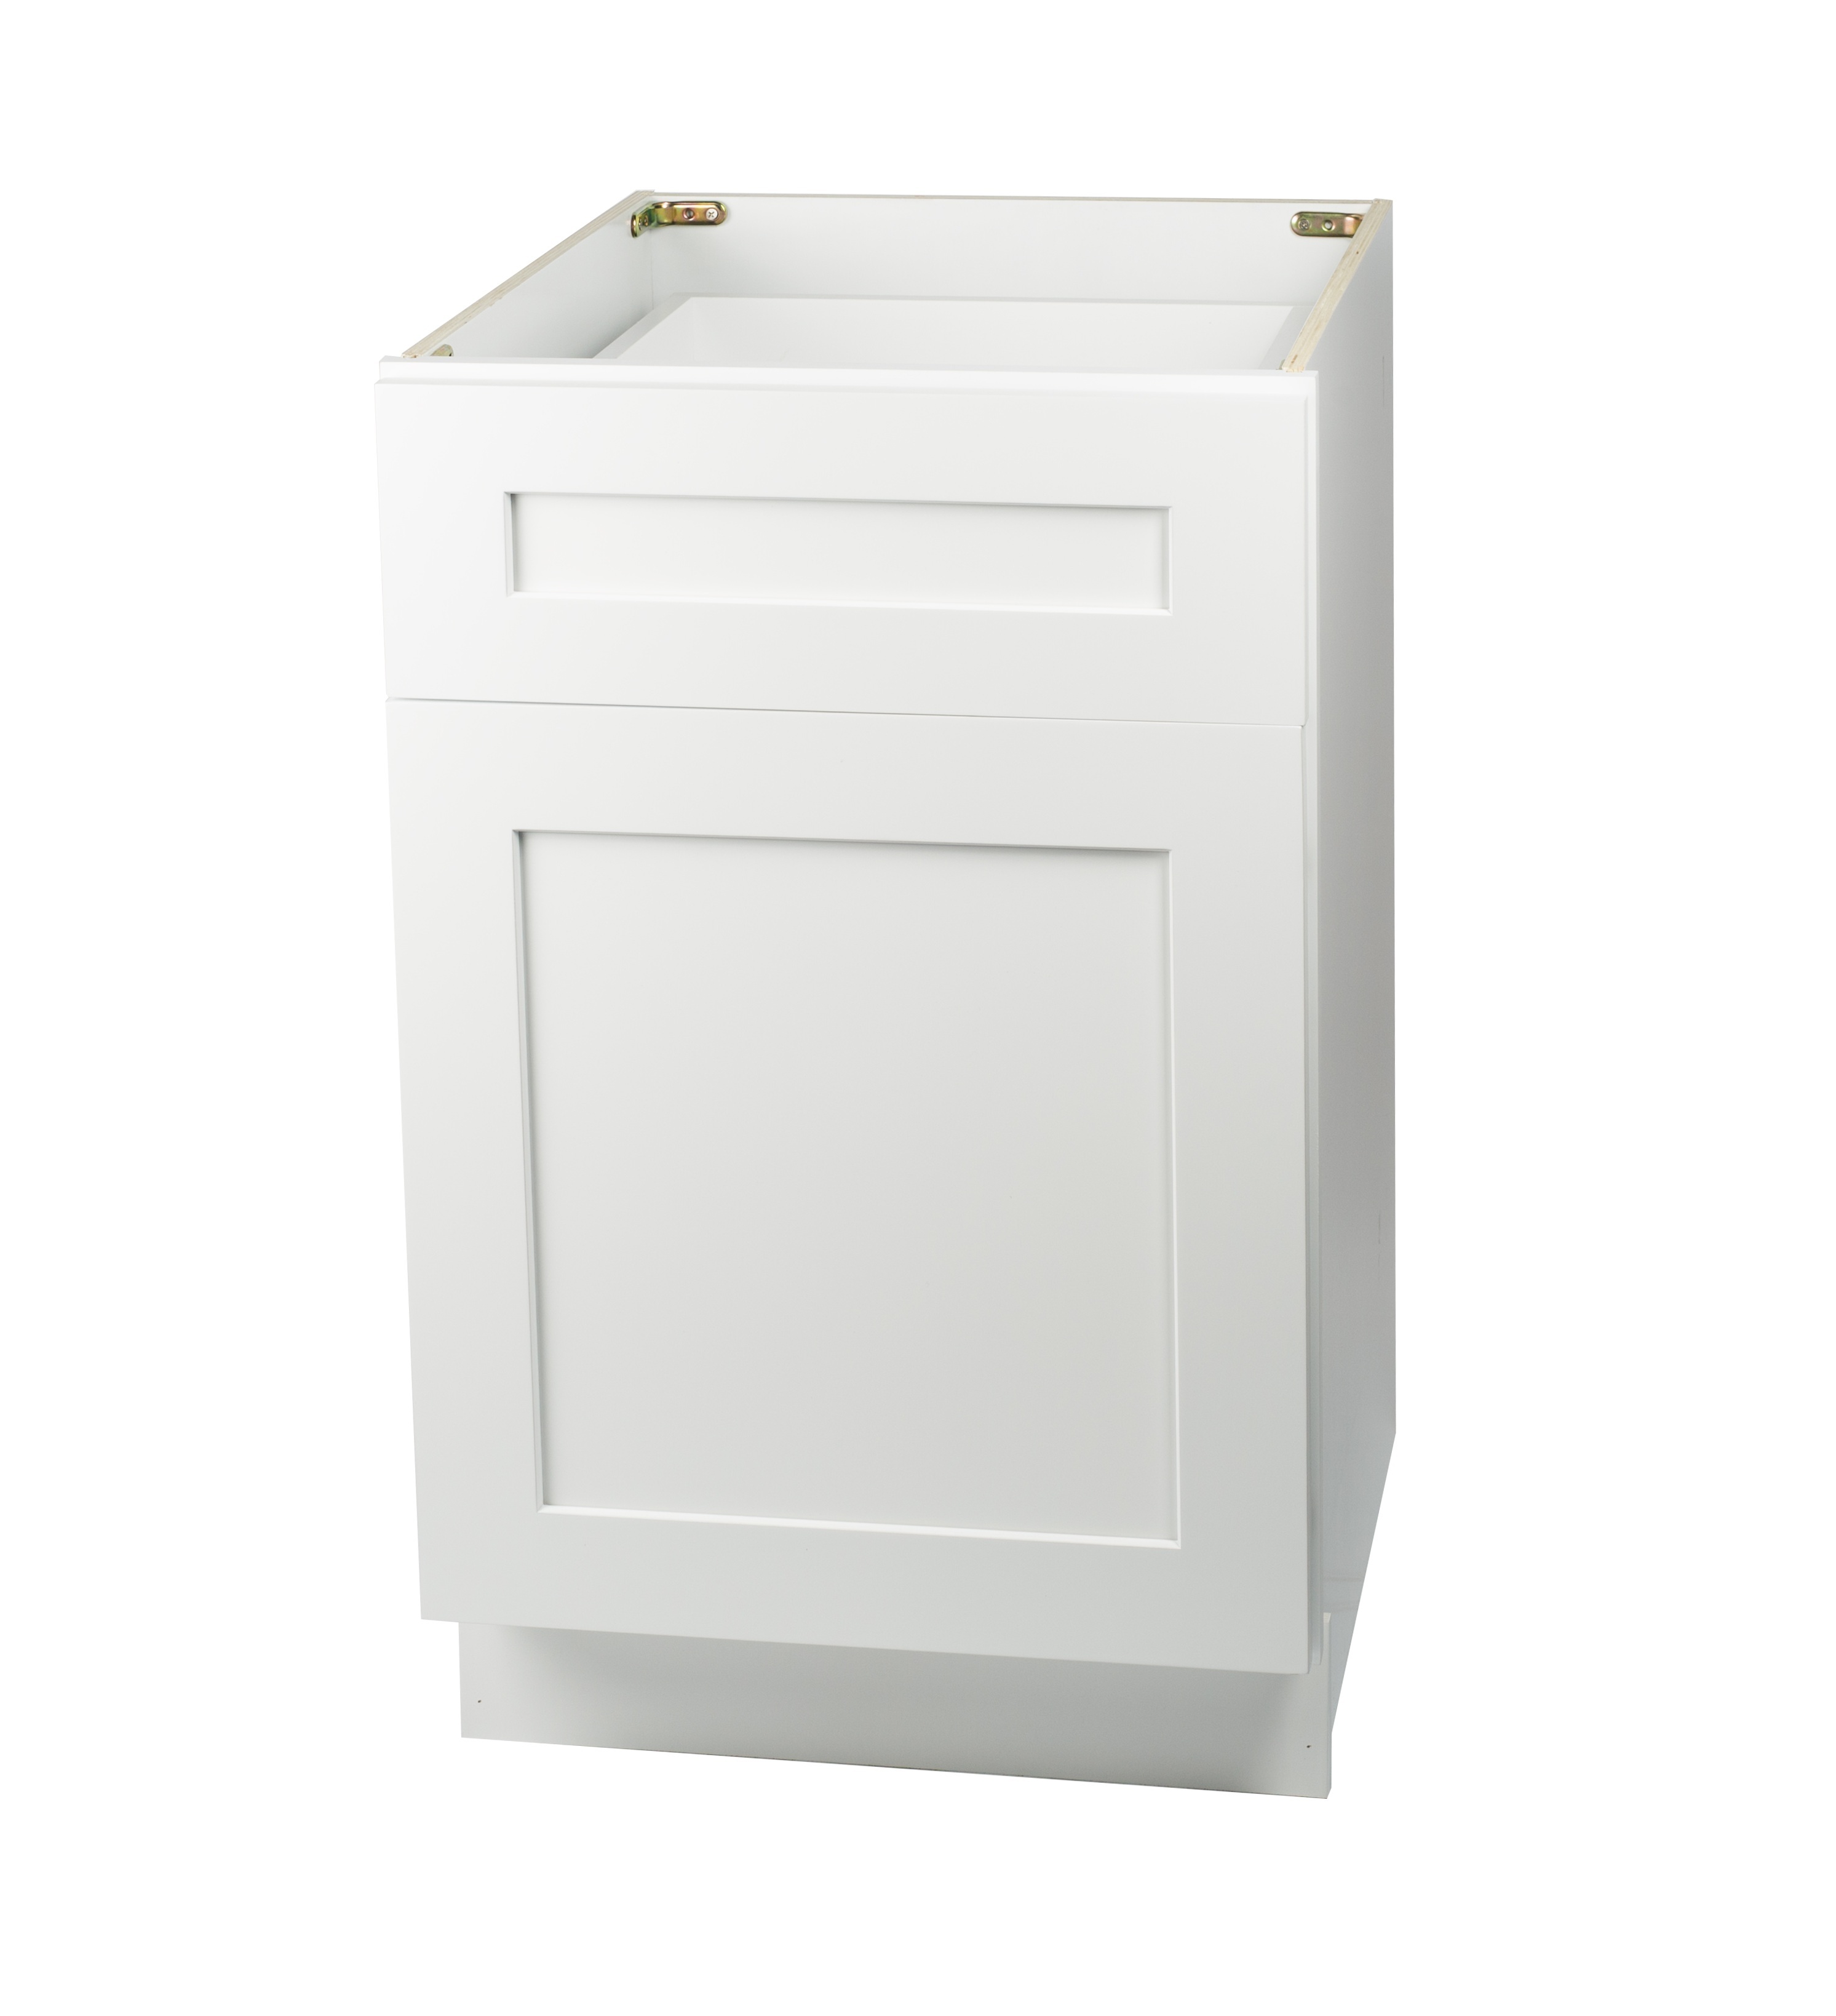 Ready to Assemble 27Wx34.5Hx24D in. Shaker Base Cabinet with 1 Door and 1 Drawer in White